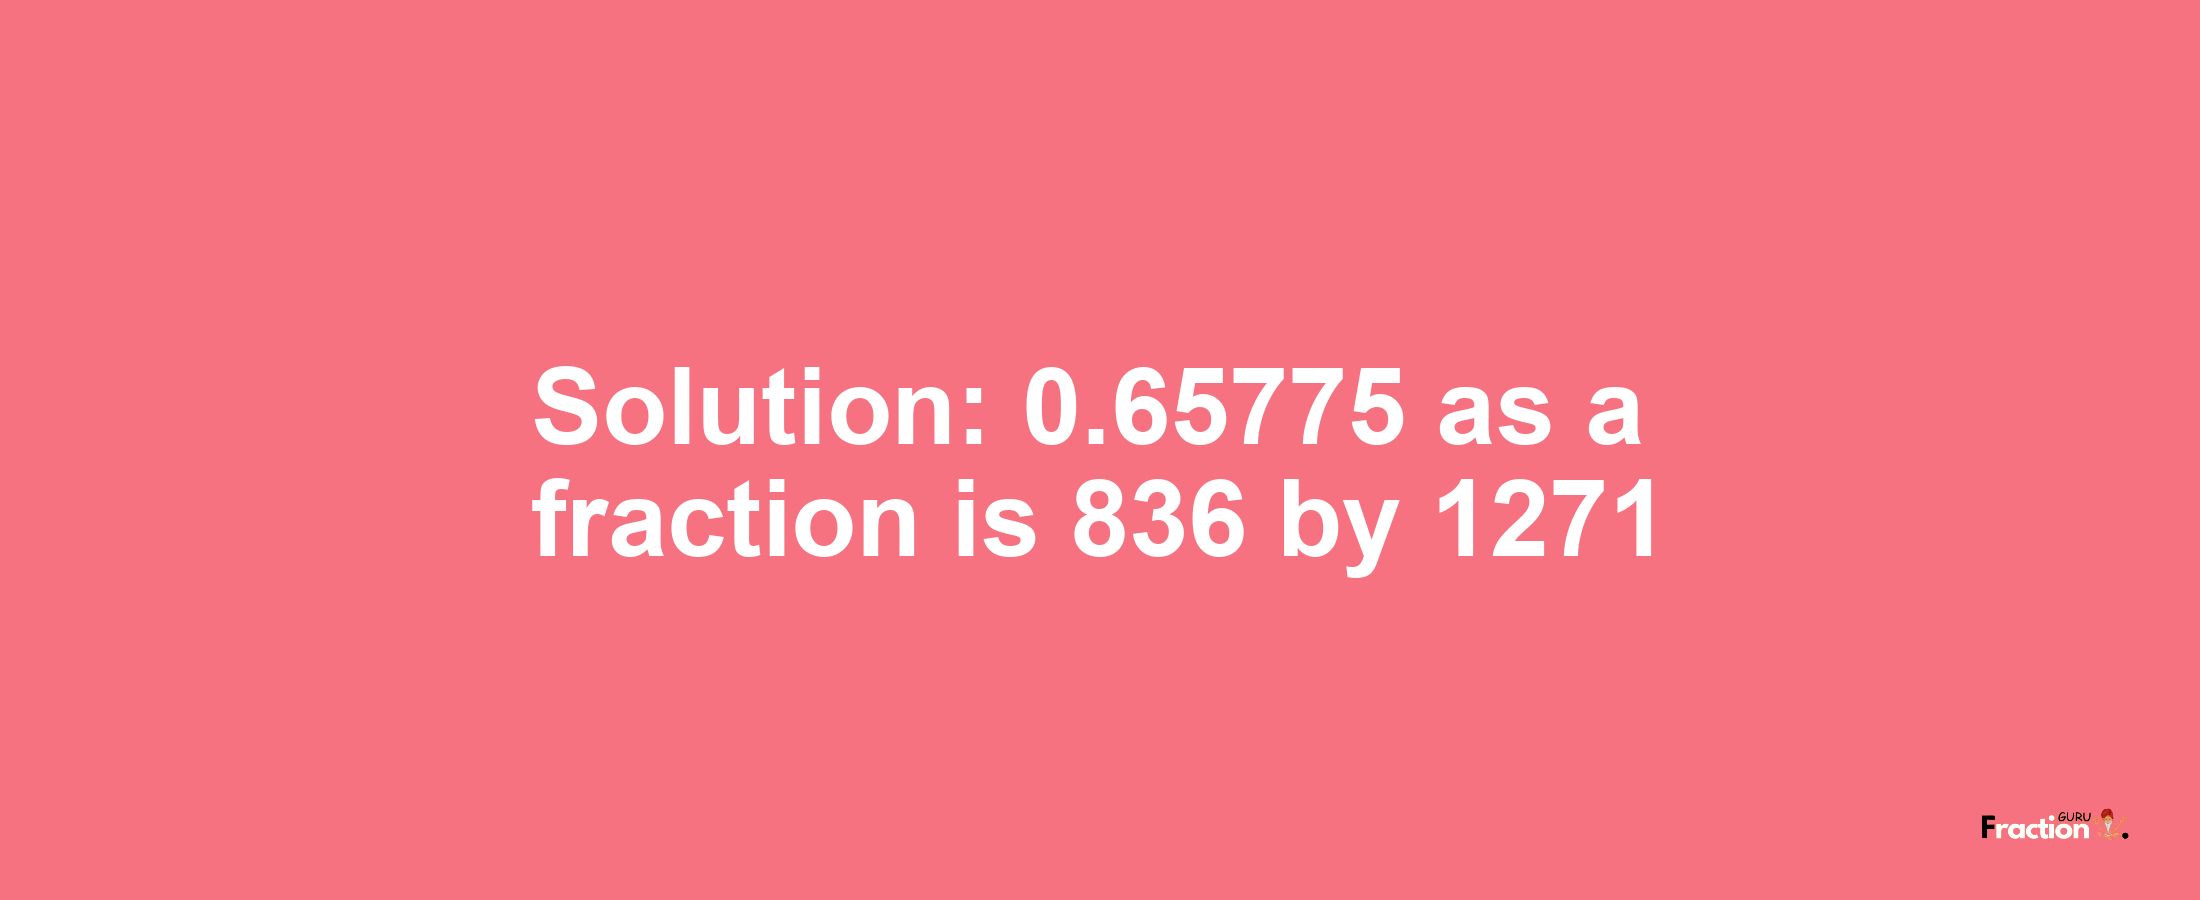 Solution:0.65775 as a fraction is 836/1271